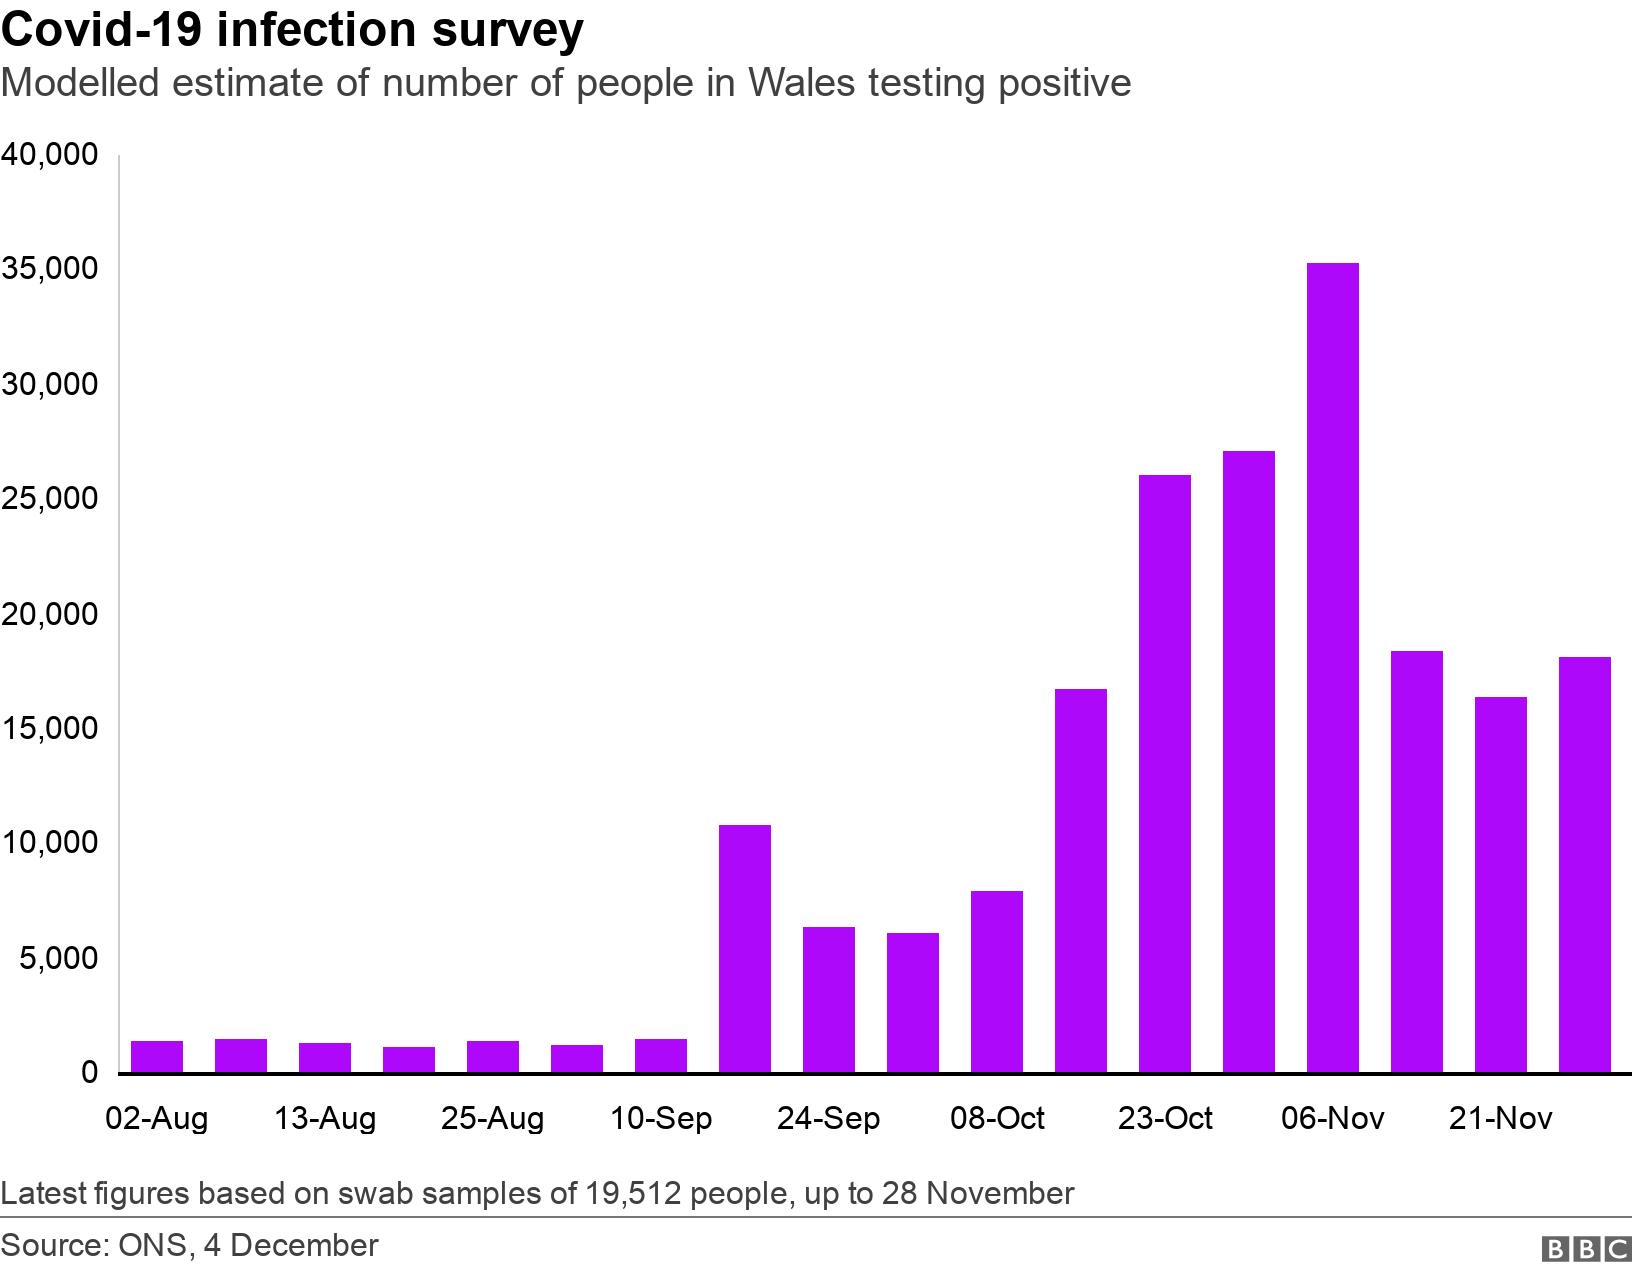 Covid-19 infection survey. Modelled estimate of number of people in Wales testing positive.  Latest figures based on swab samples of 19,512 people, up to 28 November.